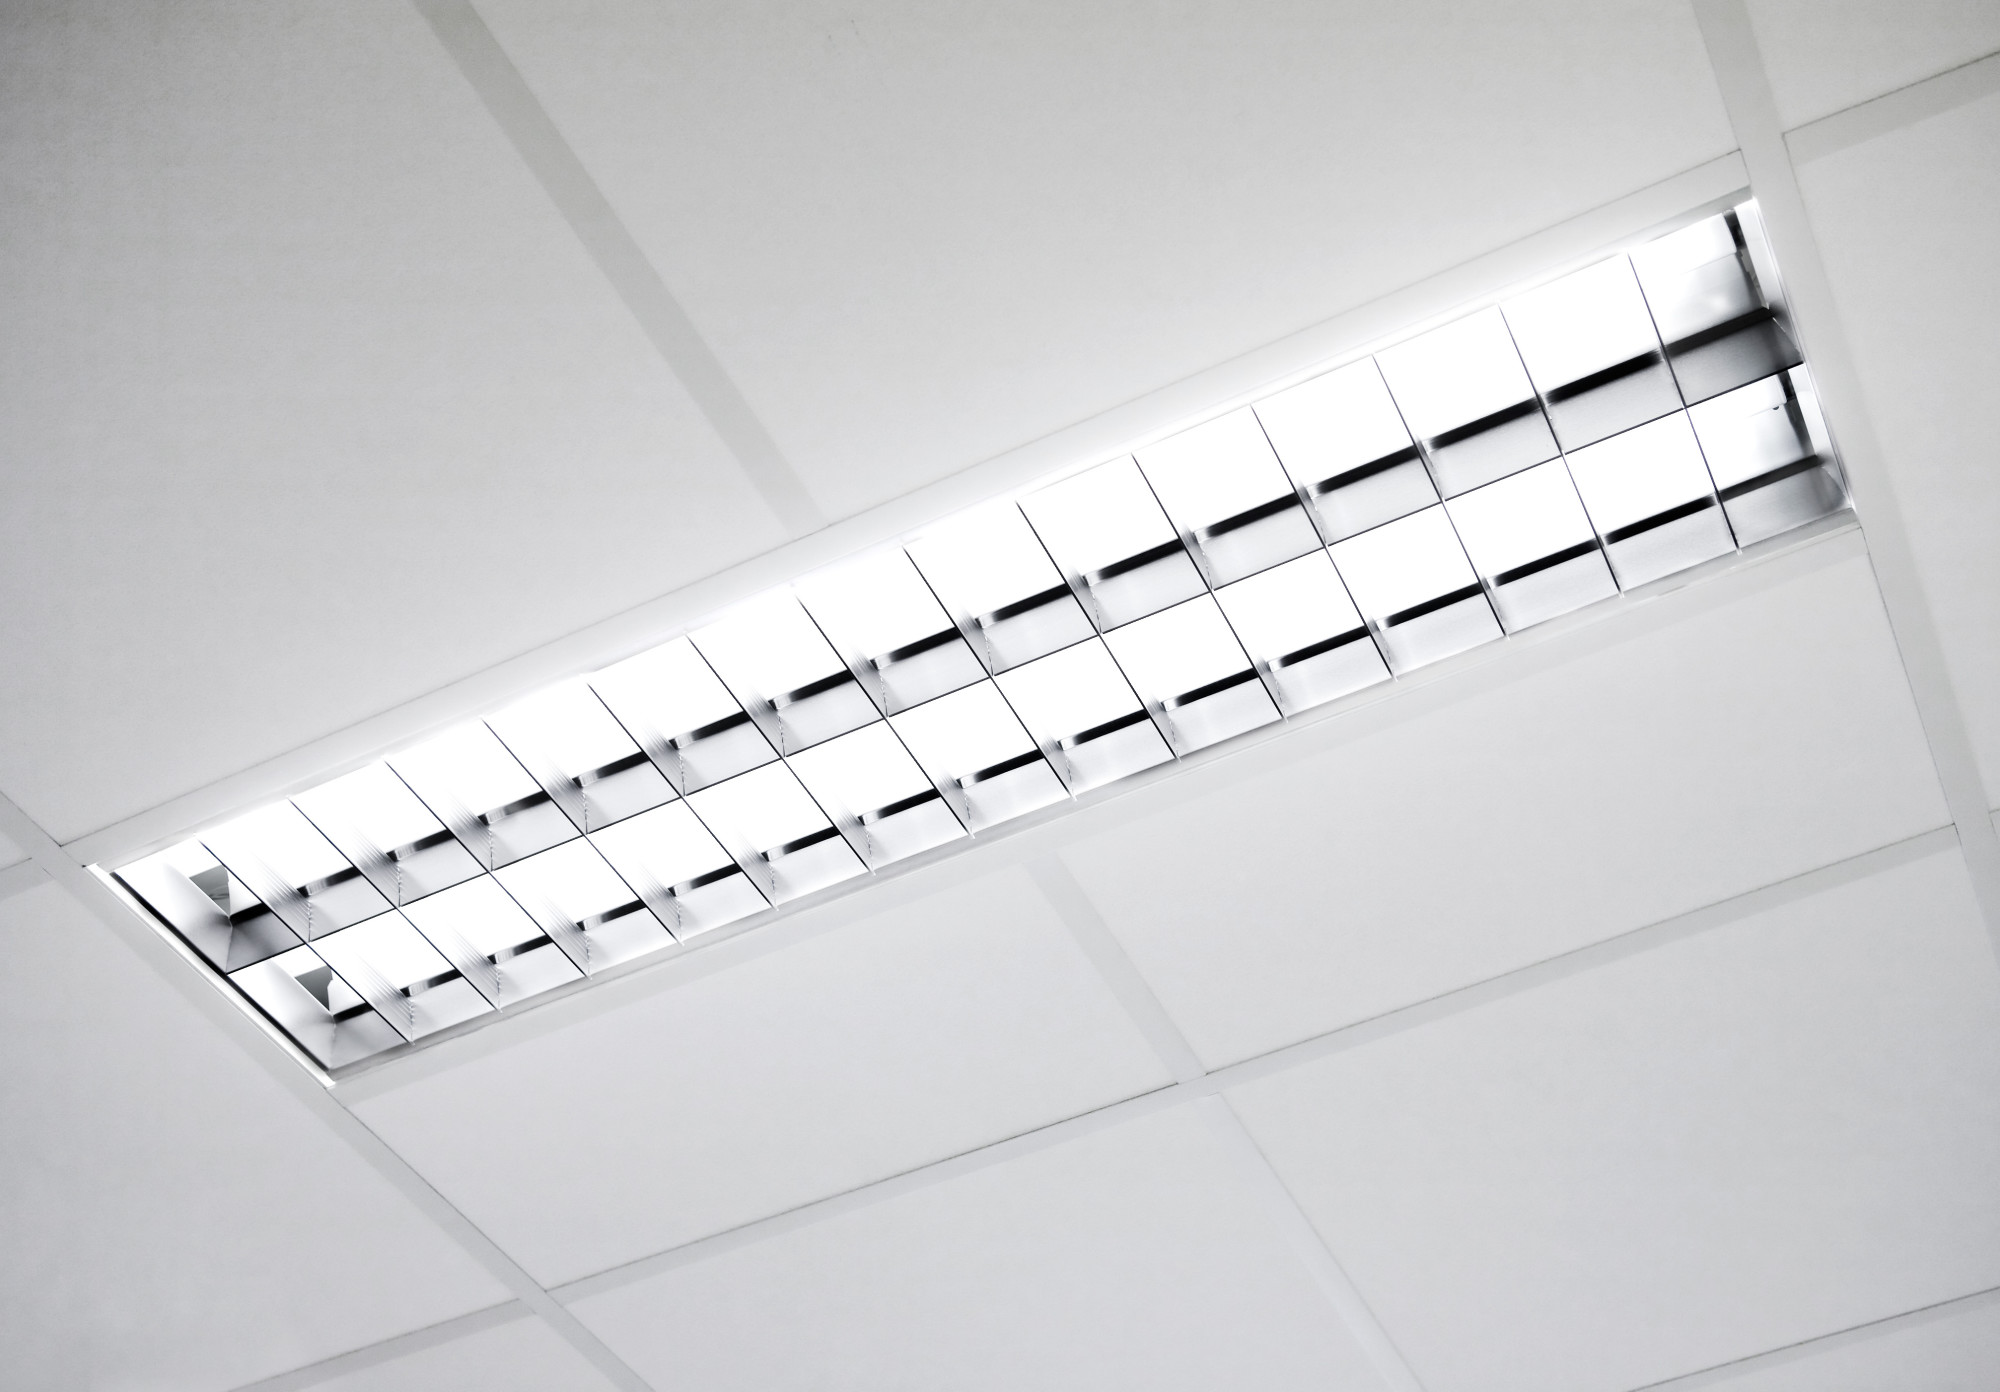 13 Low-Cost Ways to Upgrade Fluorescent Light Fixtures to LED